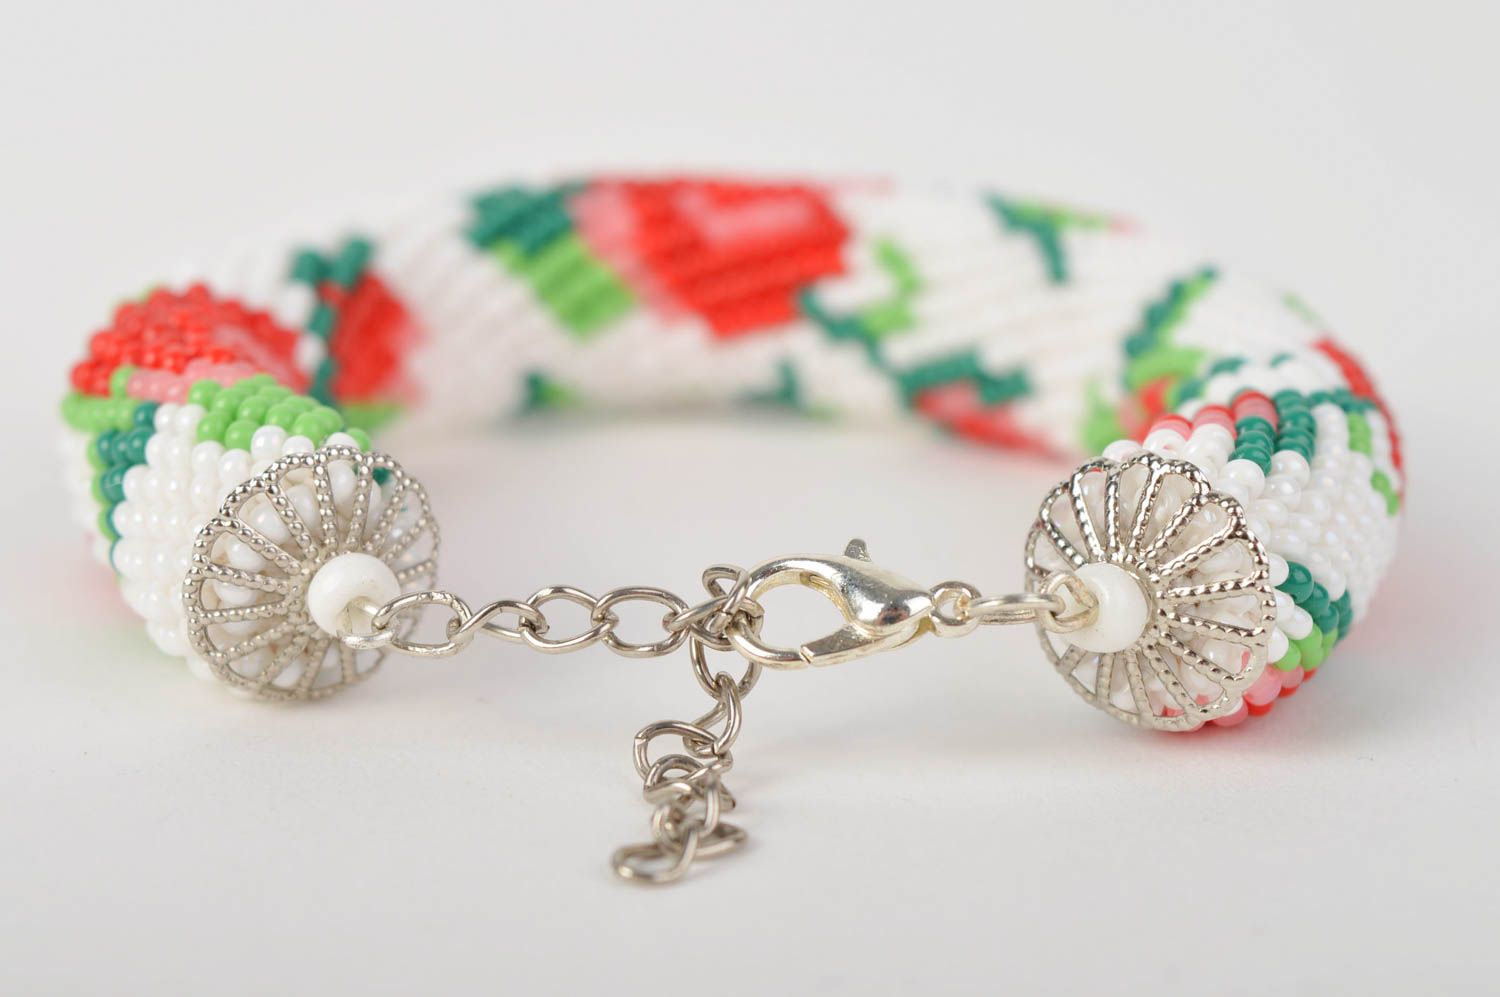 Handmade beaded cord bracelet roses in red, green, and white colors for women and girls photo 5